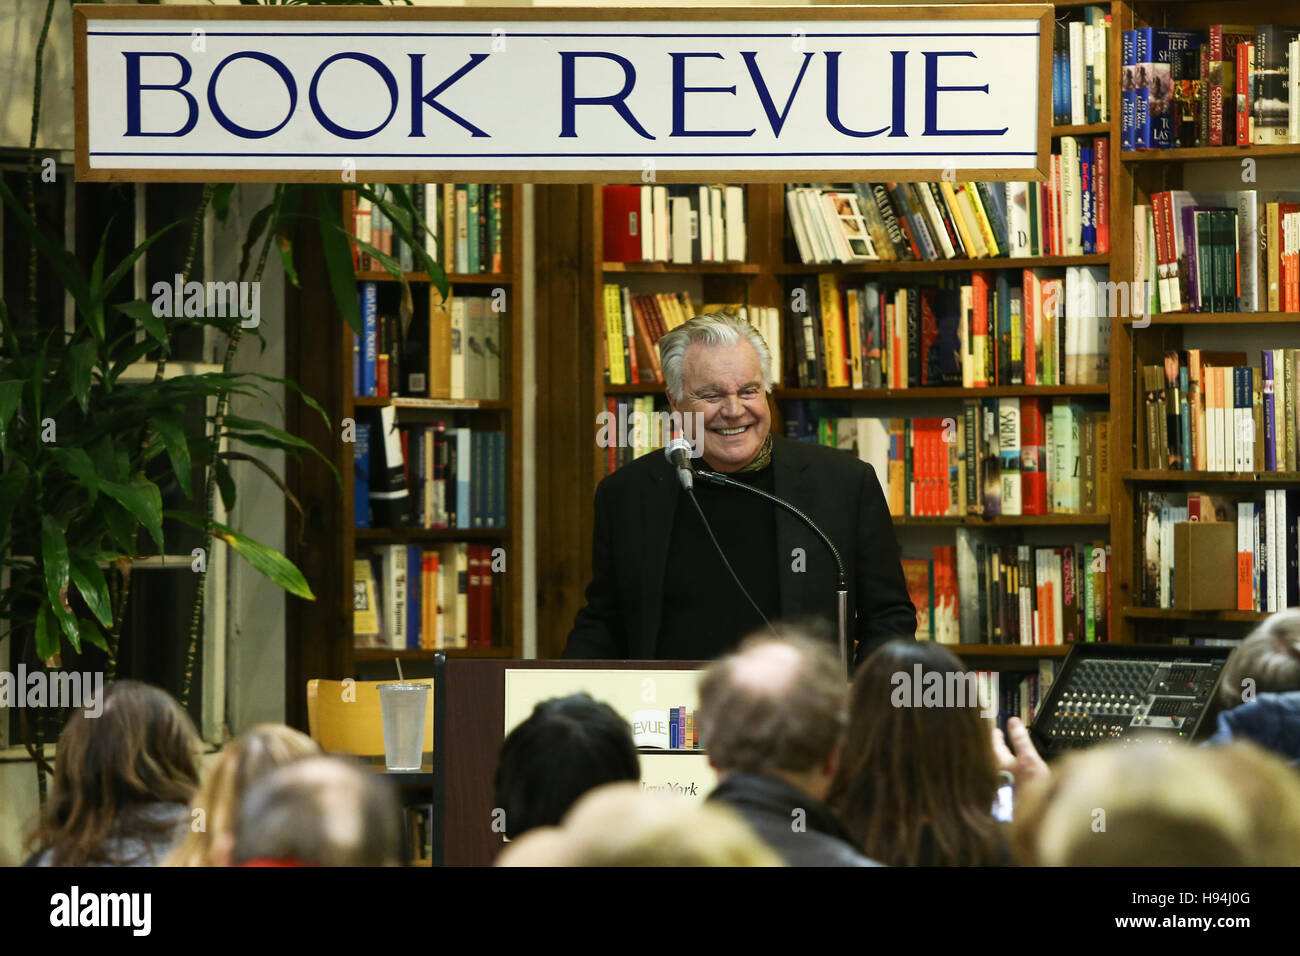 HUNTINGTON-NOV 15: Actor Robert Wagner signs copies of his book 'I Loved Her In The Movies' on November 15, 2016 at Book Revue in Huntington, New York Stock Photo